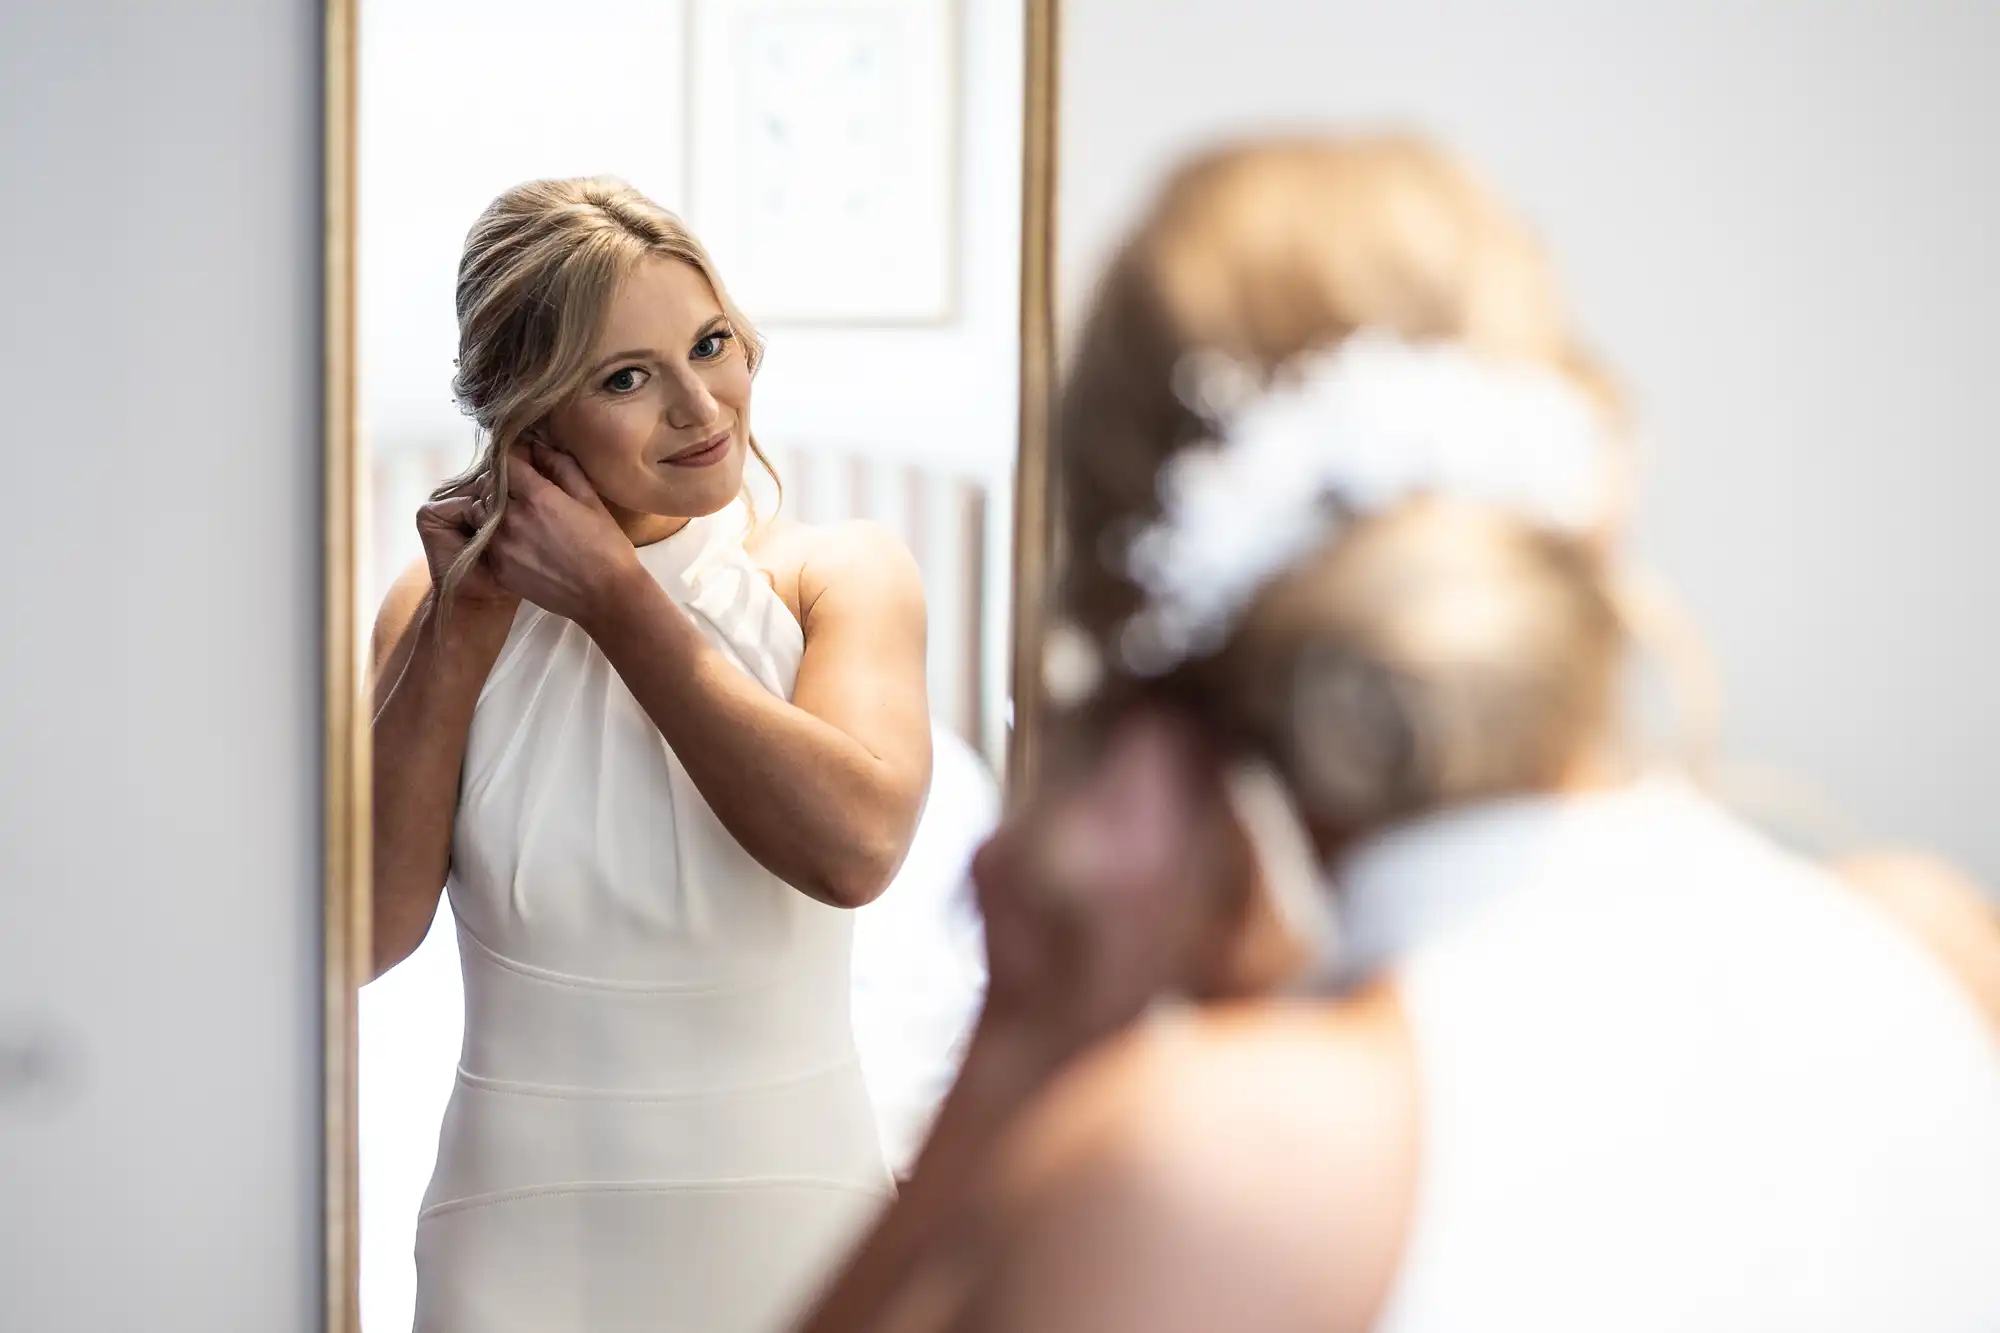 A bride in a white dress adjusts her earring while looking at her reflection in a mirror, smiling gently.